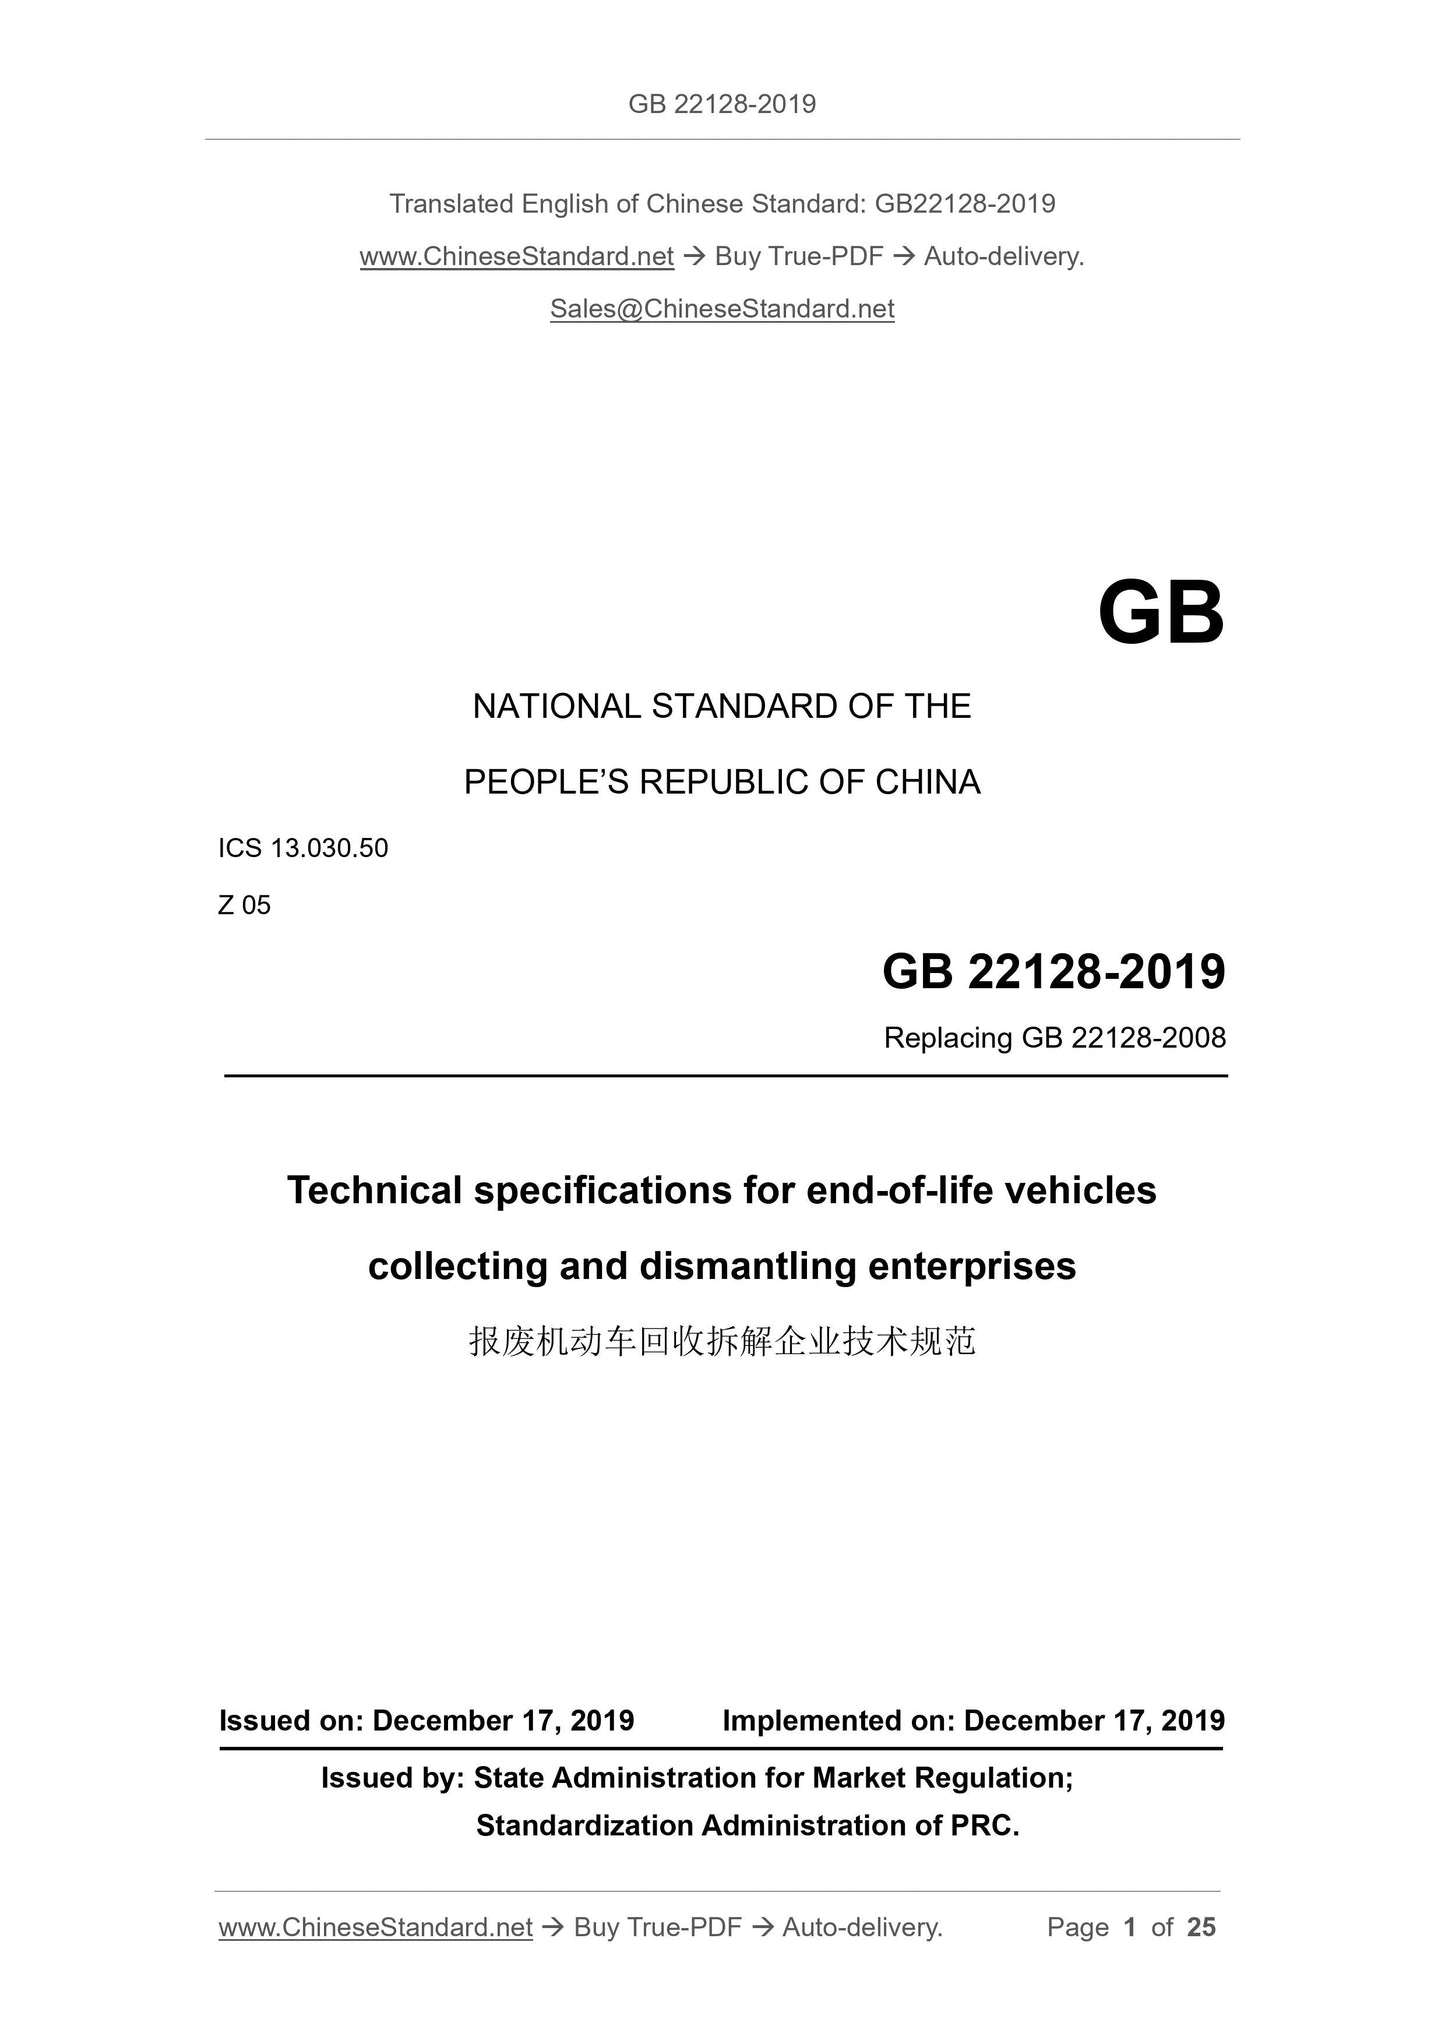 GB 22128-2019 Page 1